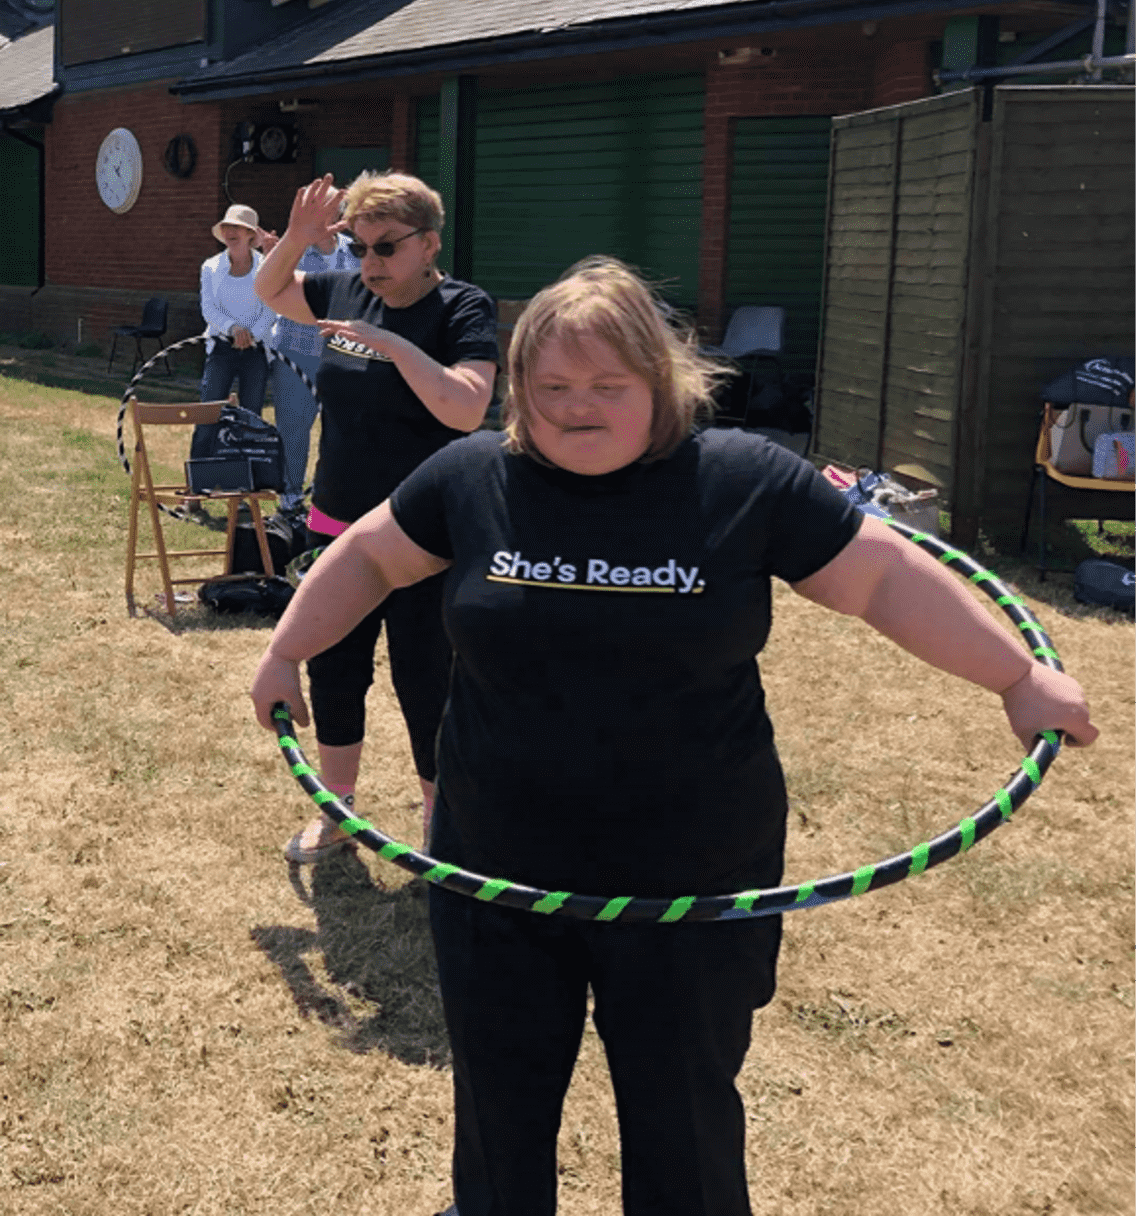 Female hula hooping in an outdoor space 